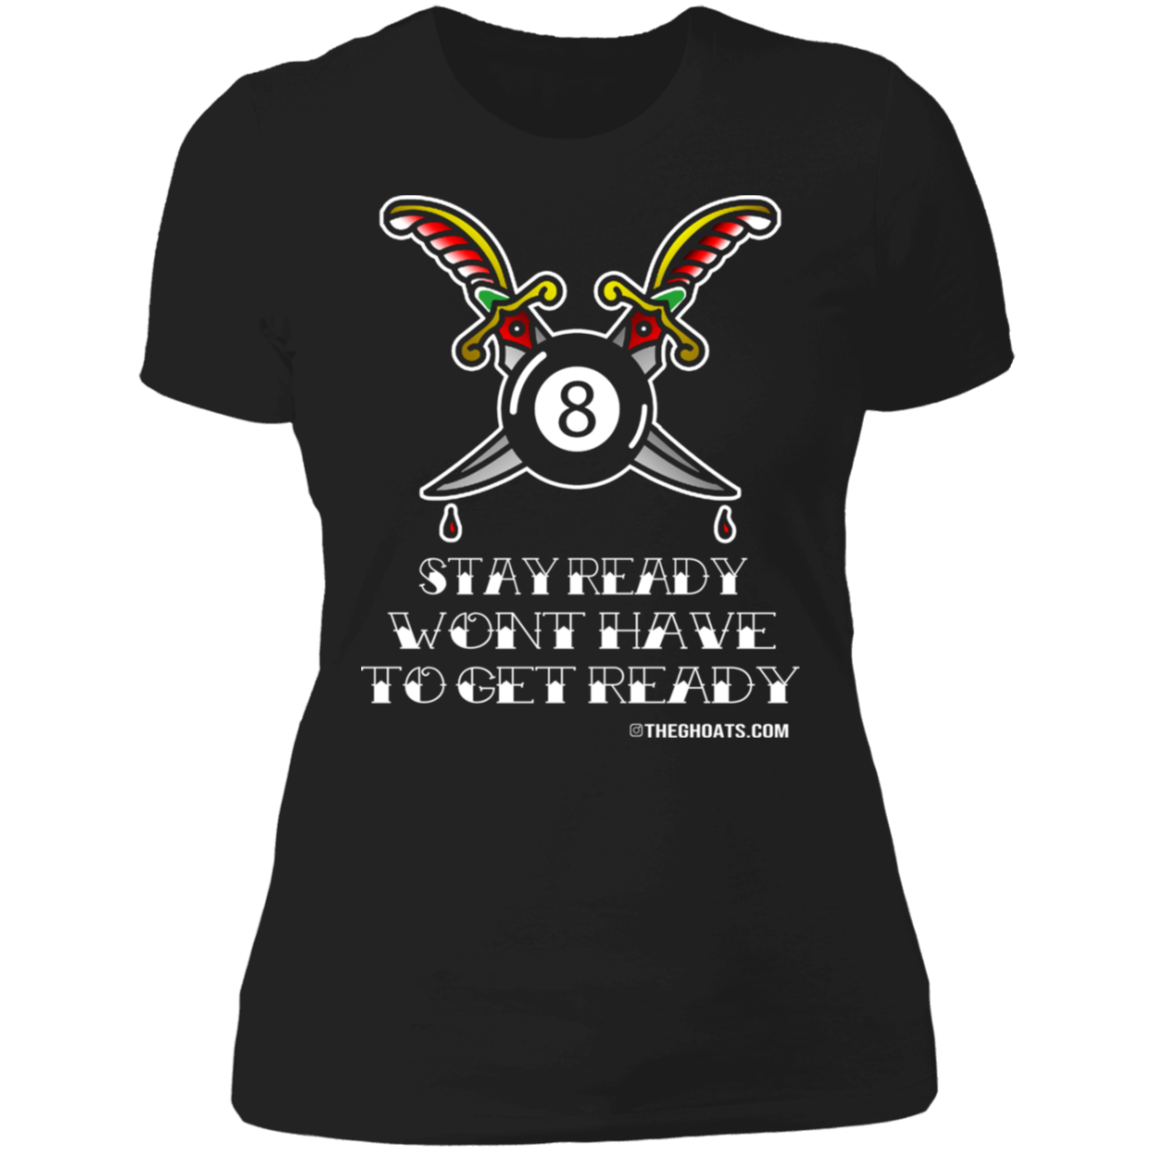 The GHOATS Custom Design #36. Stay Ready Won't Have to Get Ready. Tattoo Style. Ver. 1/2. Ladies' Boyfriend T-Shirt